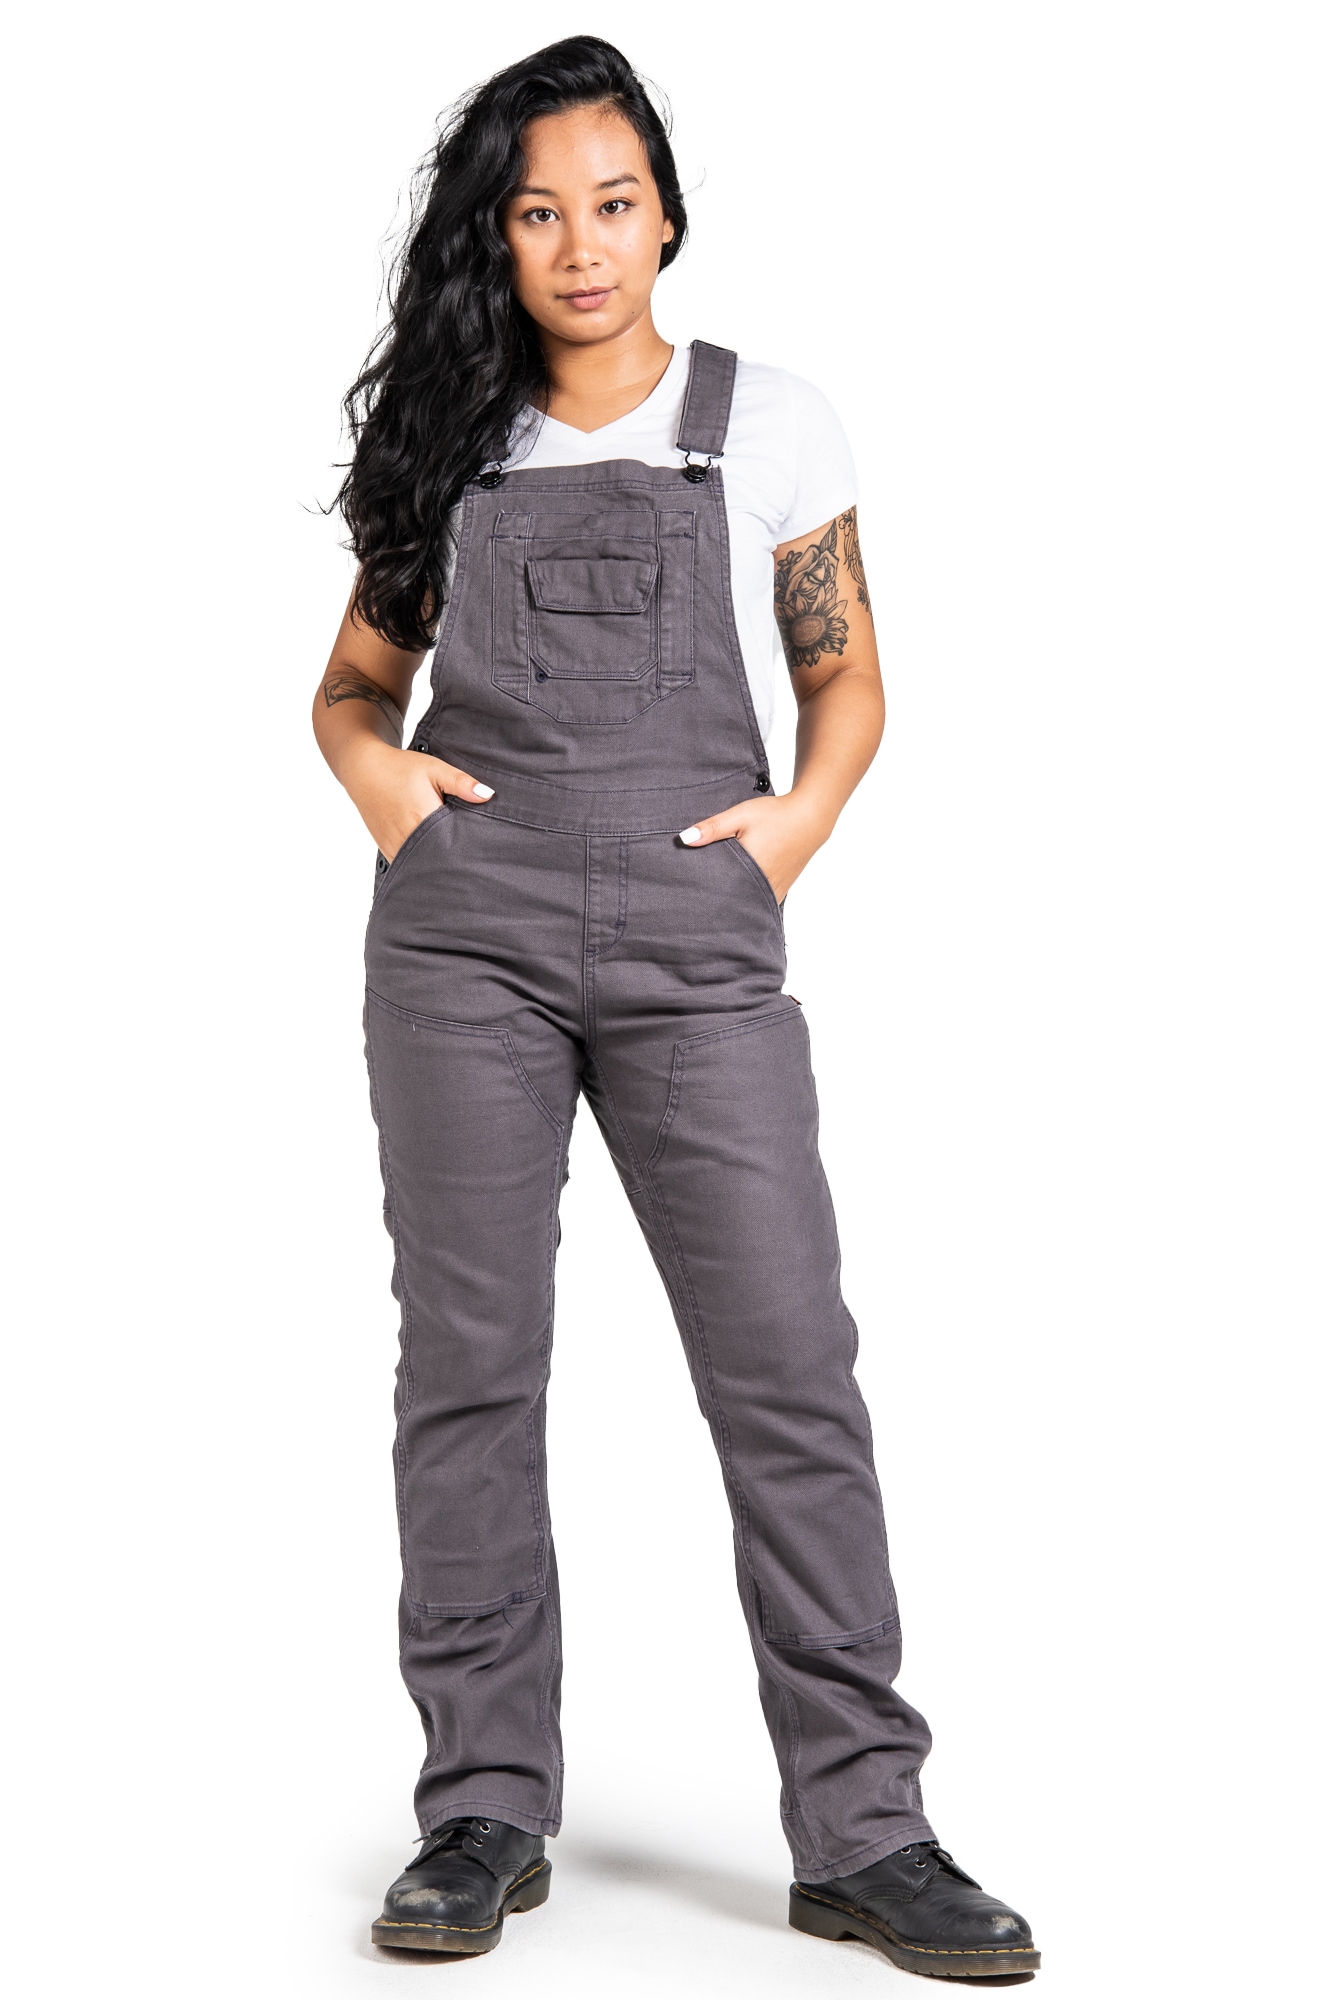 Dovetail Workwear Women's Dark Grey Canvas Overall in the Coveralls ...